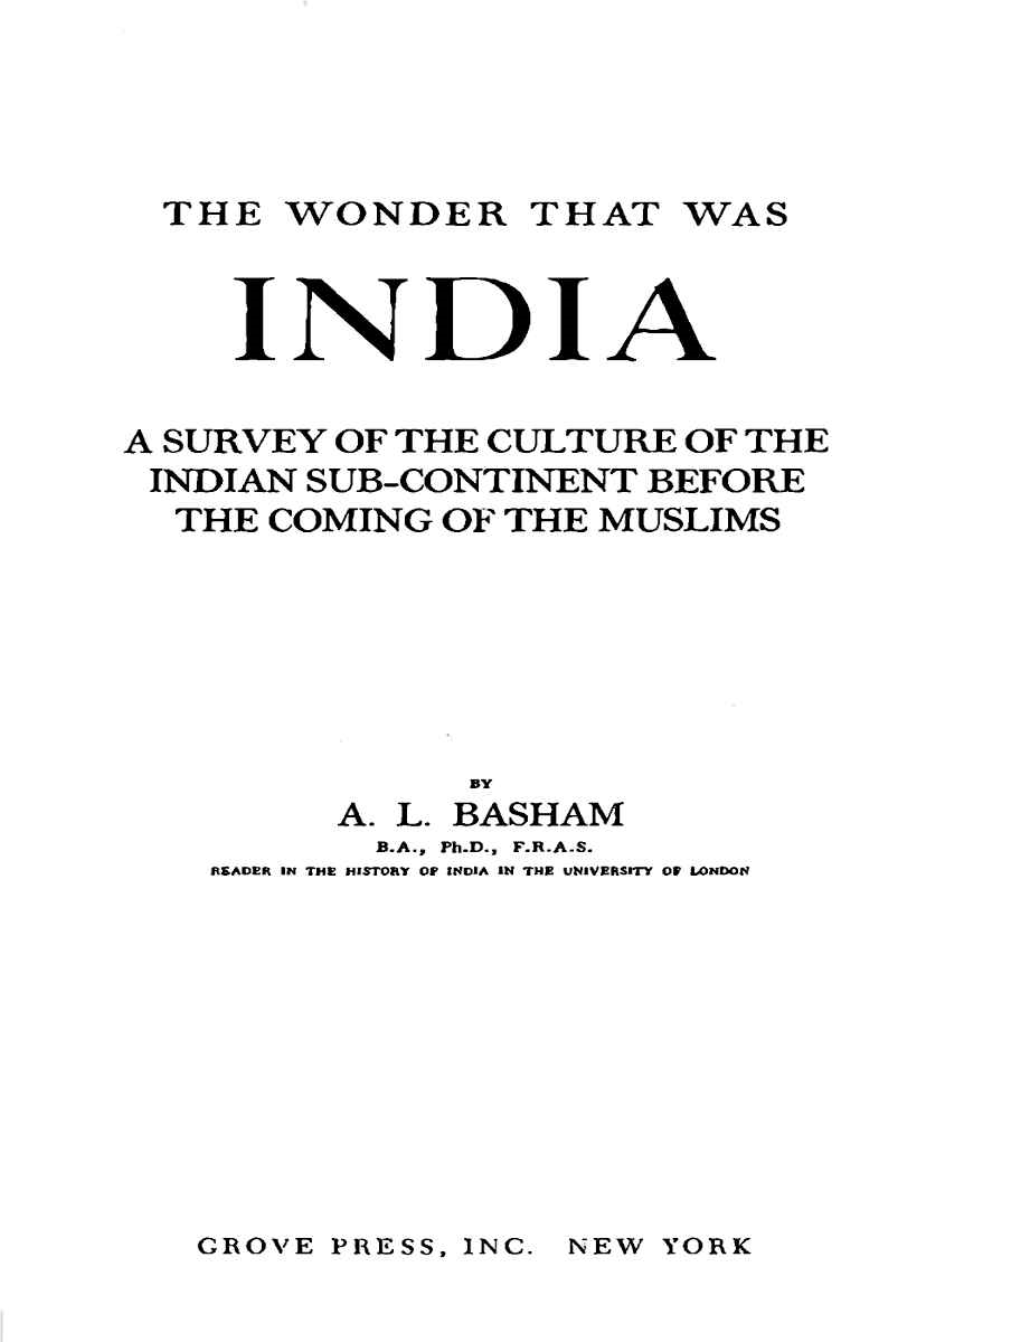 A Survey Ofthe Culture of the Indiansub-Continent